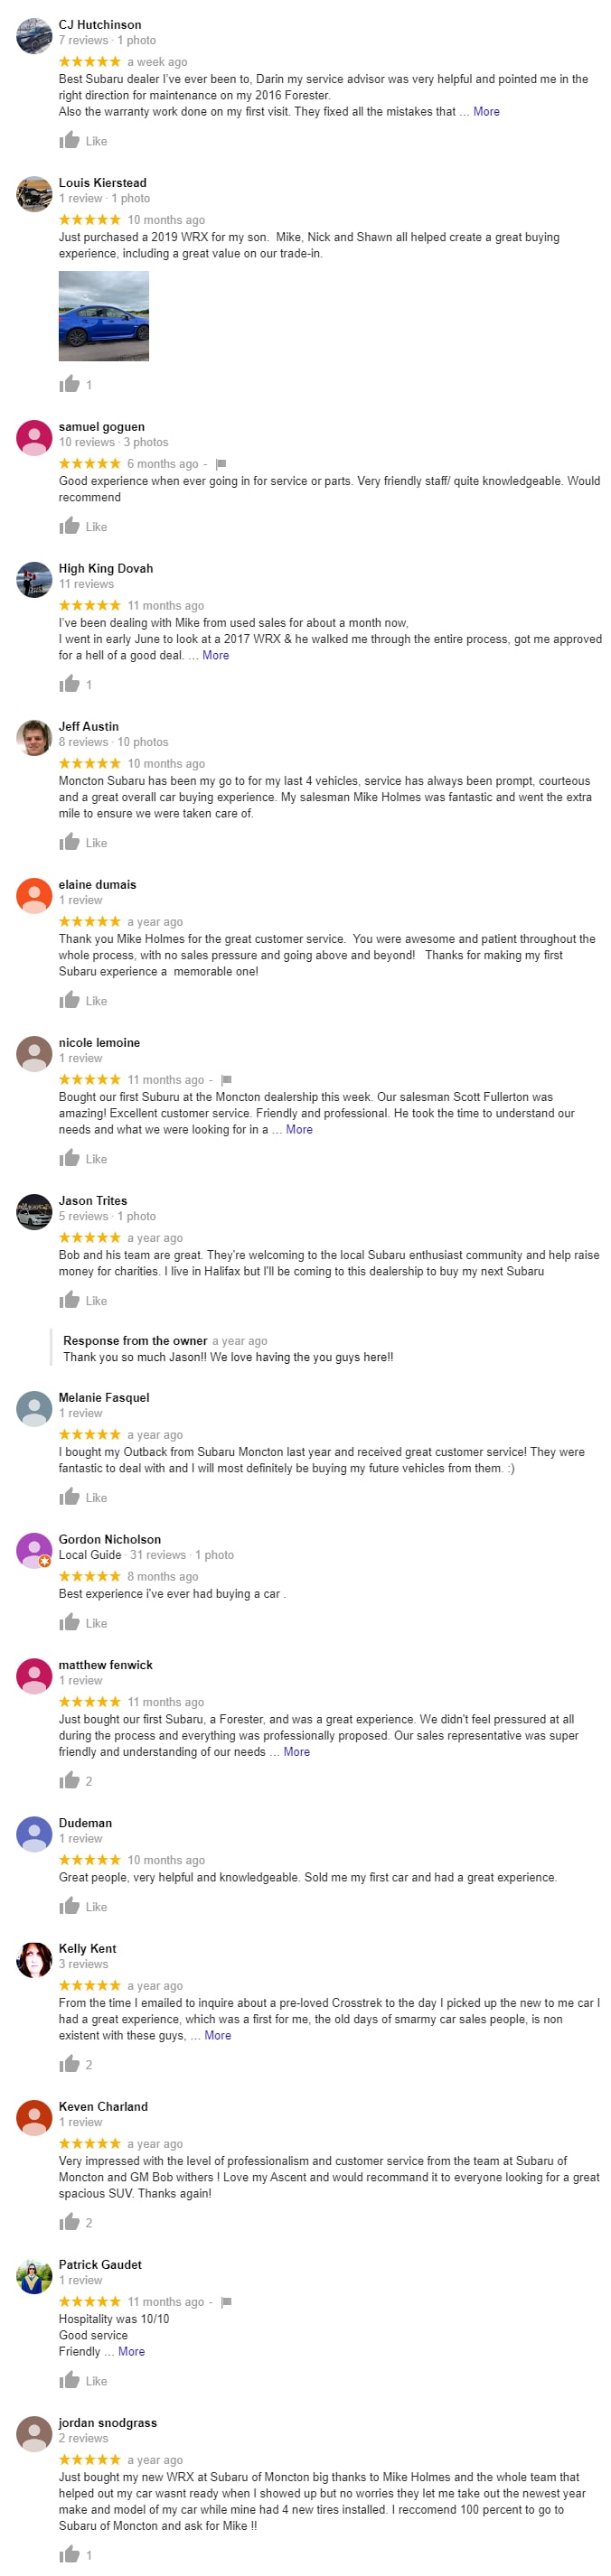 View all Google reviews